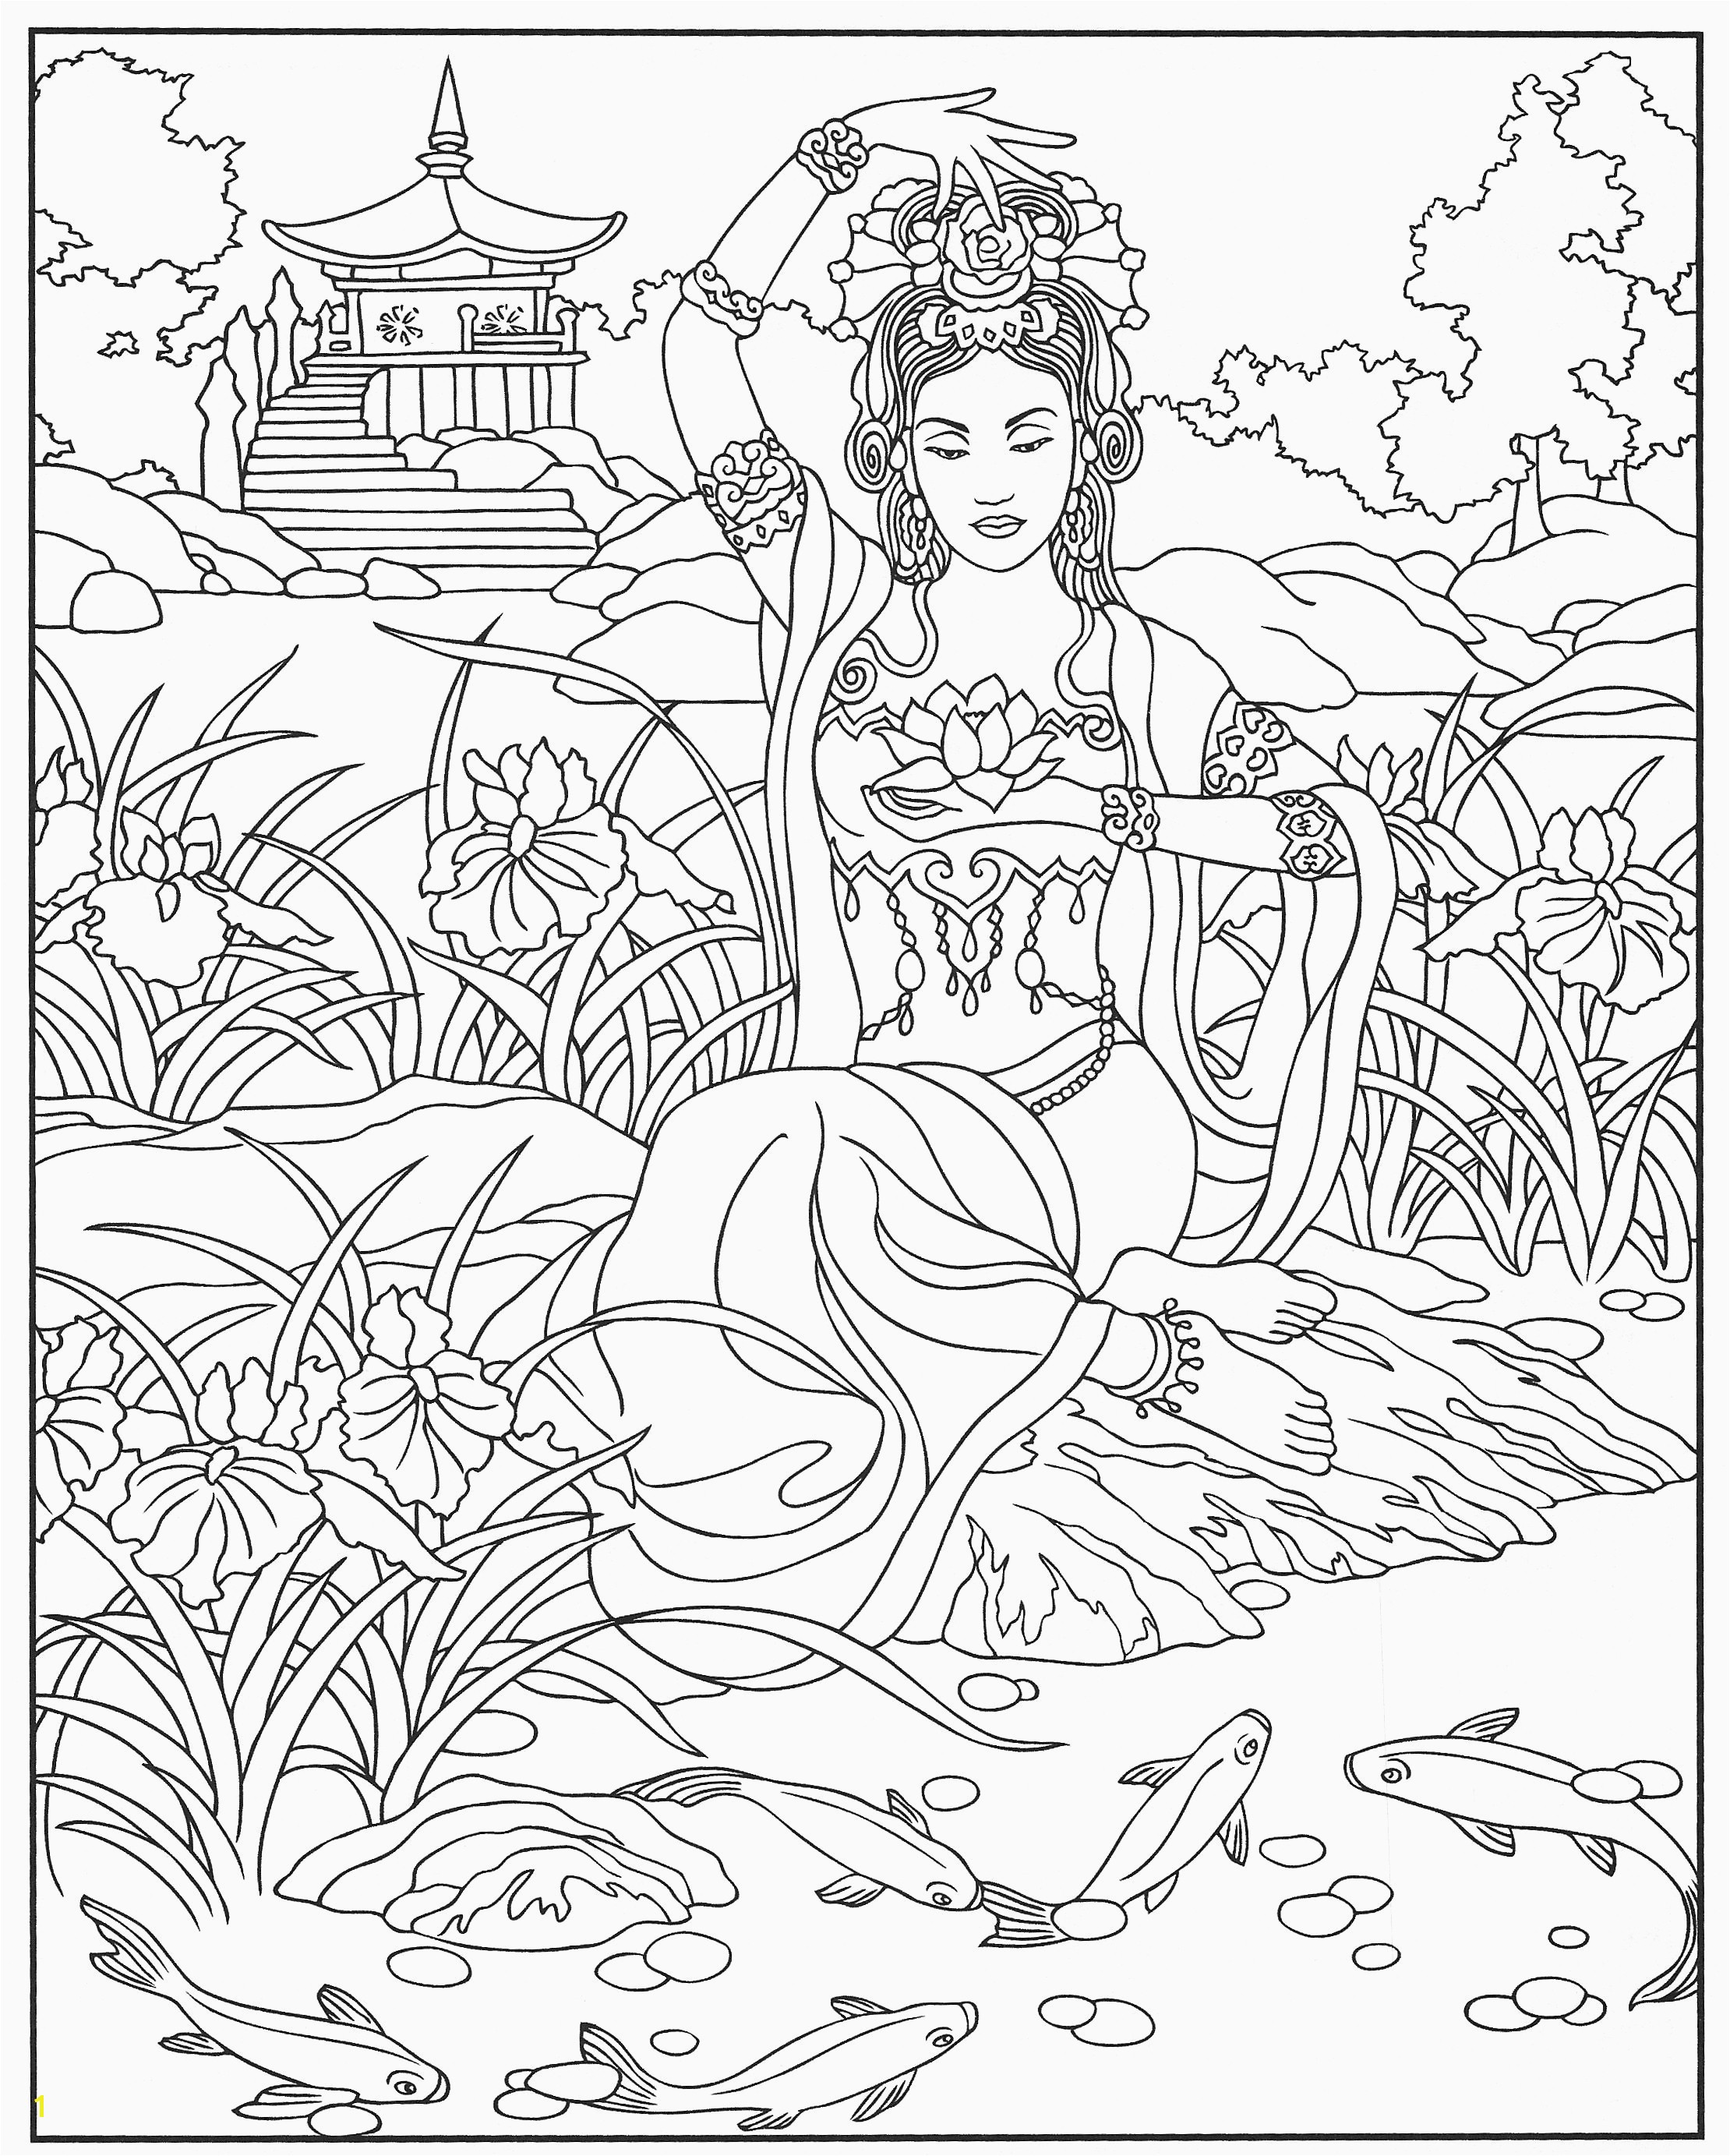 Tortoise and the Hare Coloring Page 14 Unique tortoise and the Hare Coloring Page S